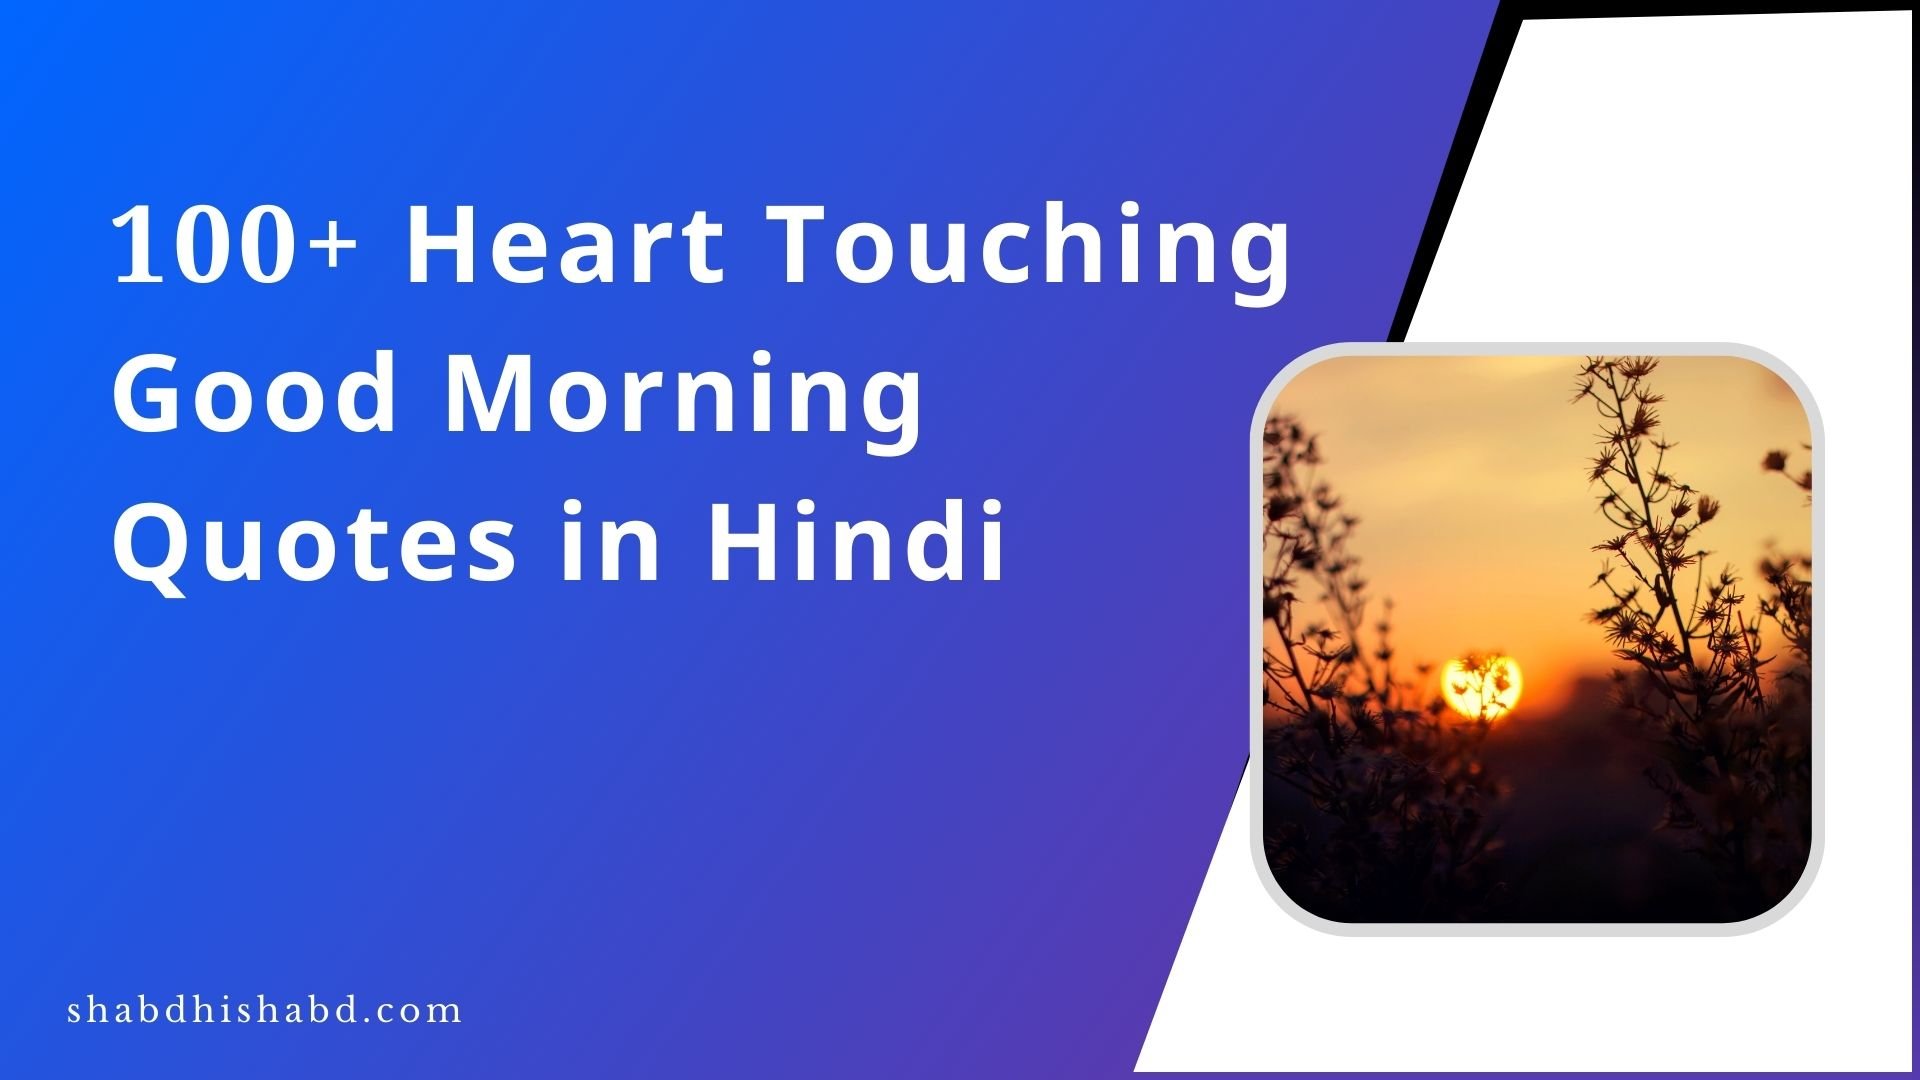 100+ Heart Touching Good Morning Quotes in Hindi